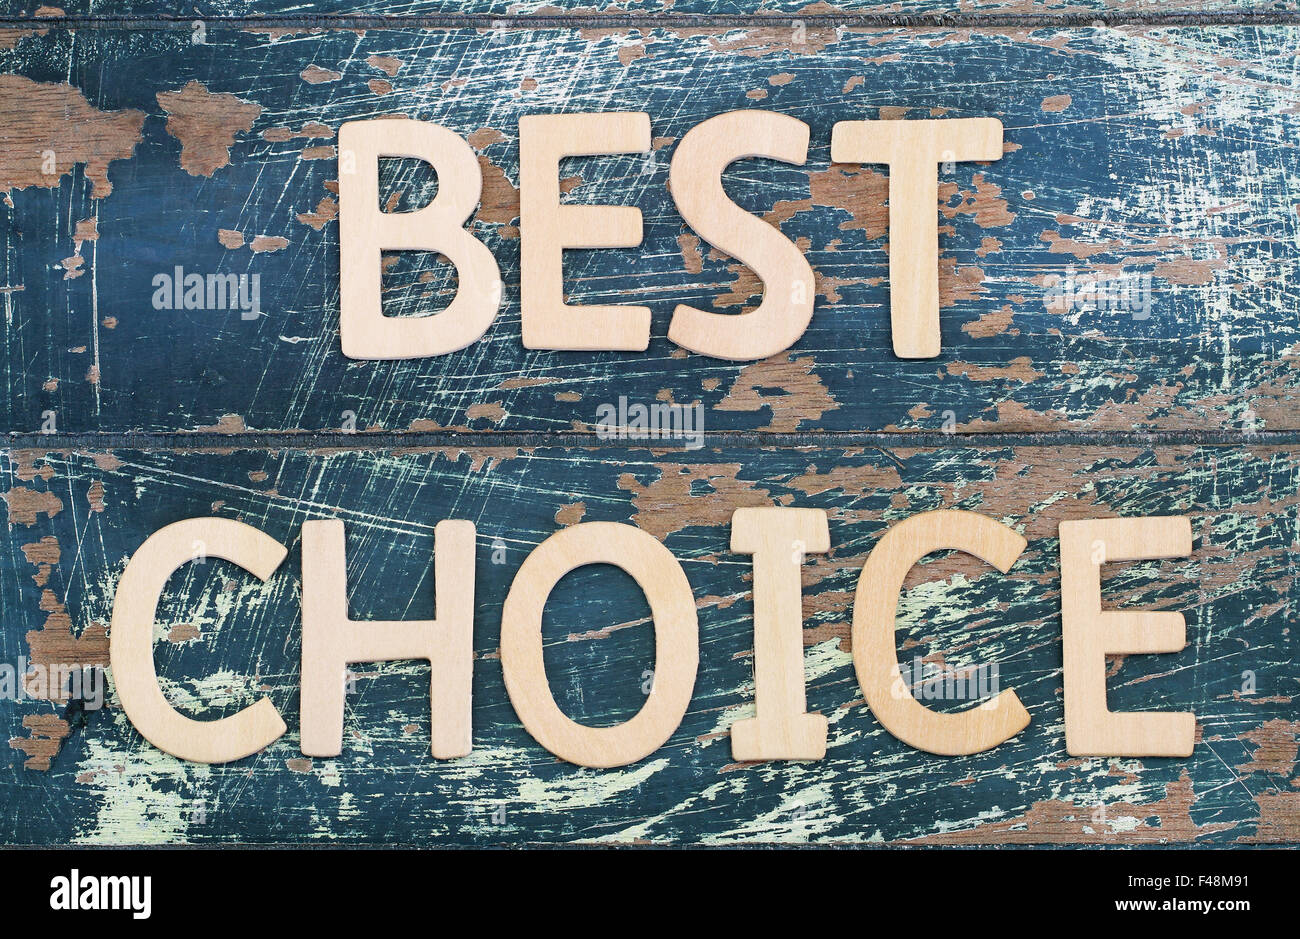 Best choice written on rustic wooden surface Stock Photo